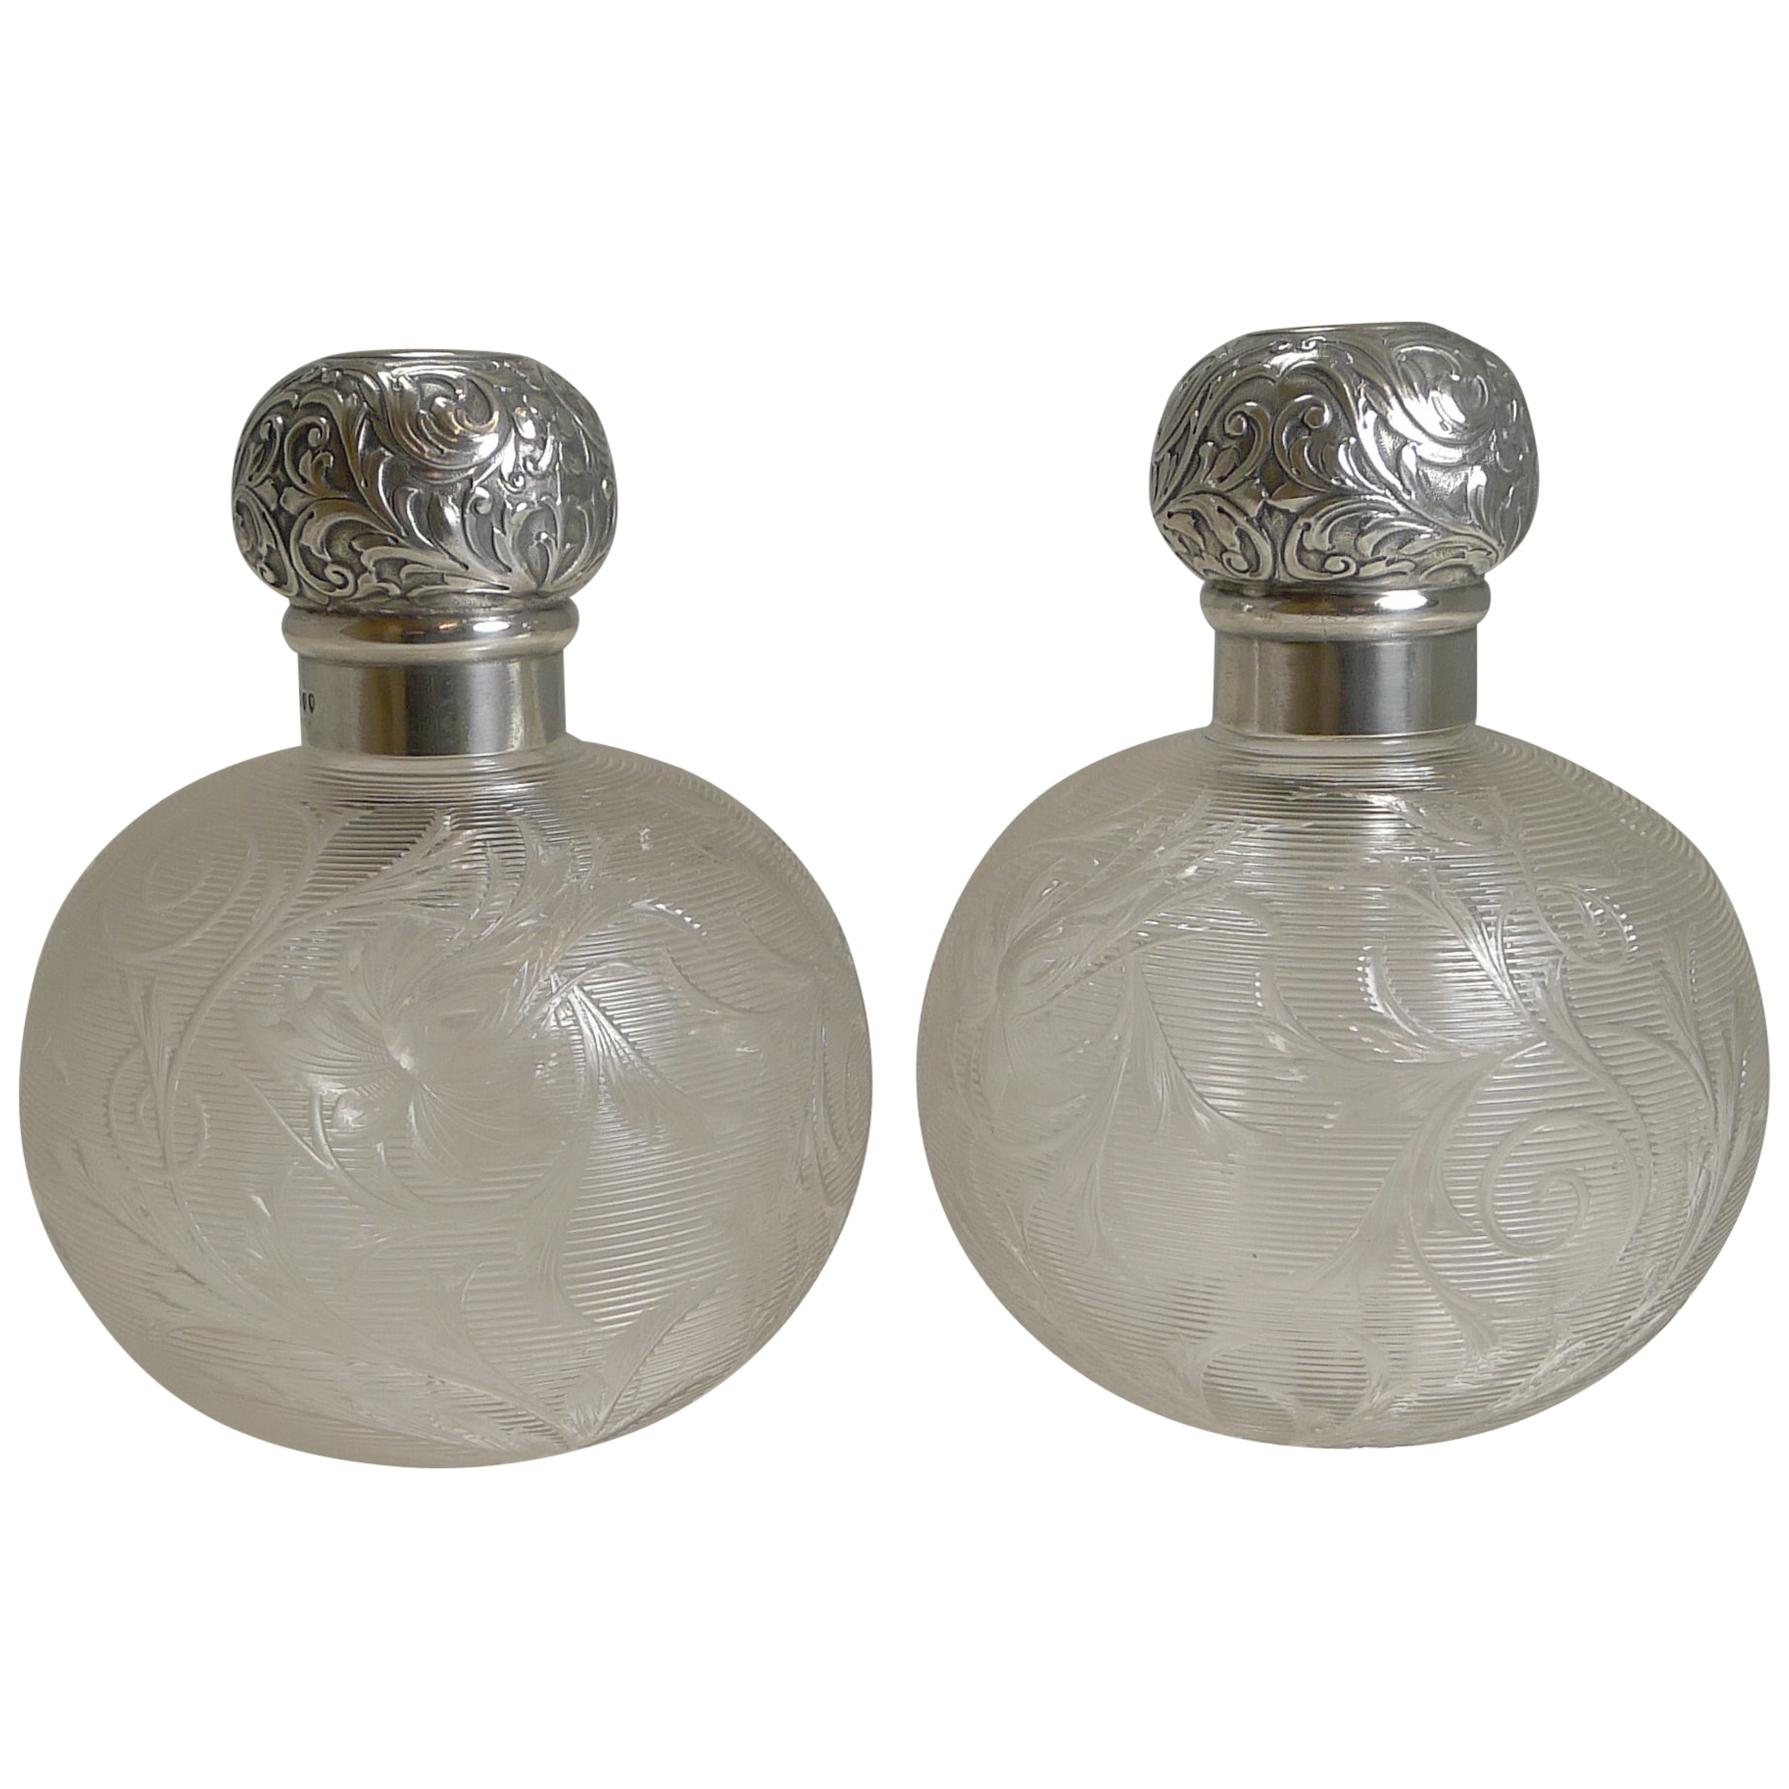 Finest Pair of Antique English Sterling Topped Perfume Bottles by Asprey, London